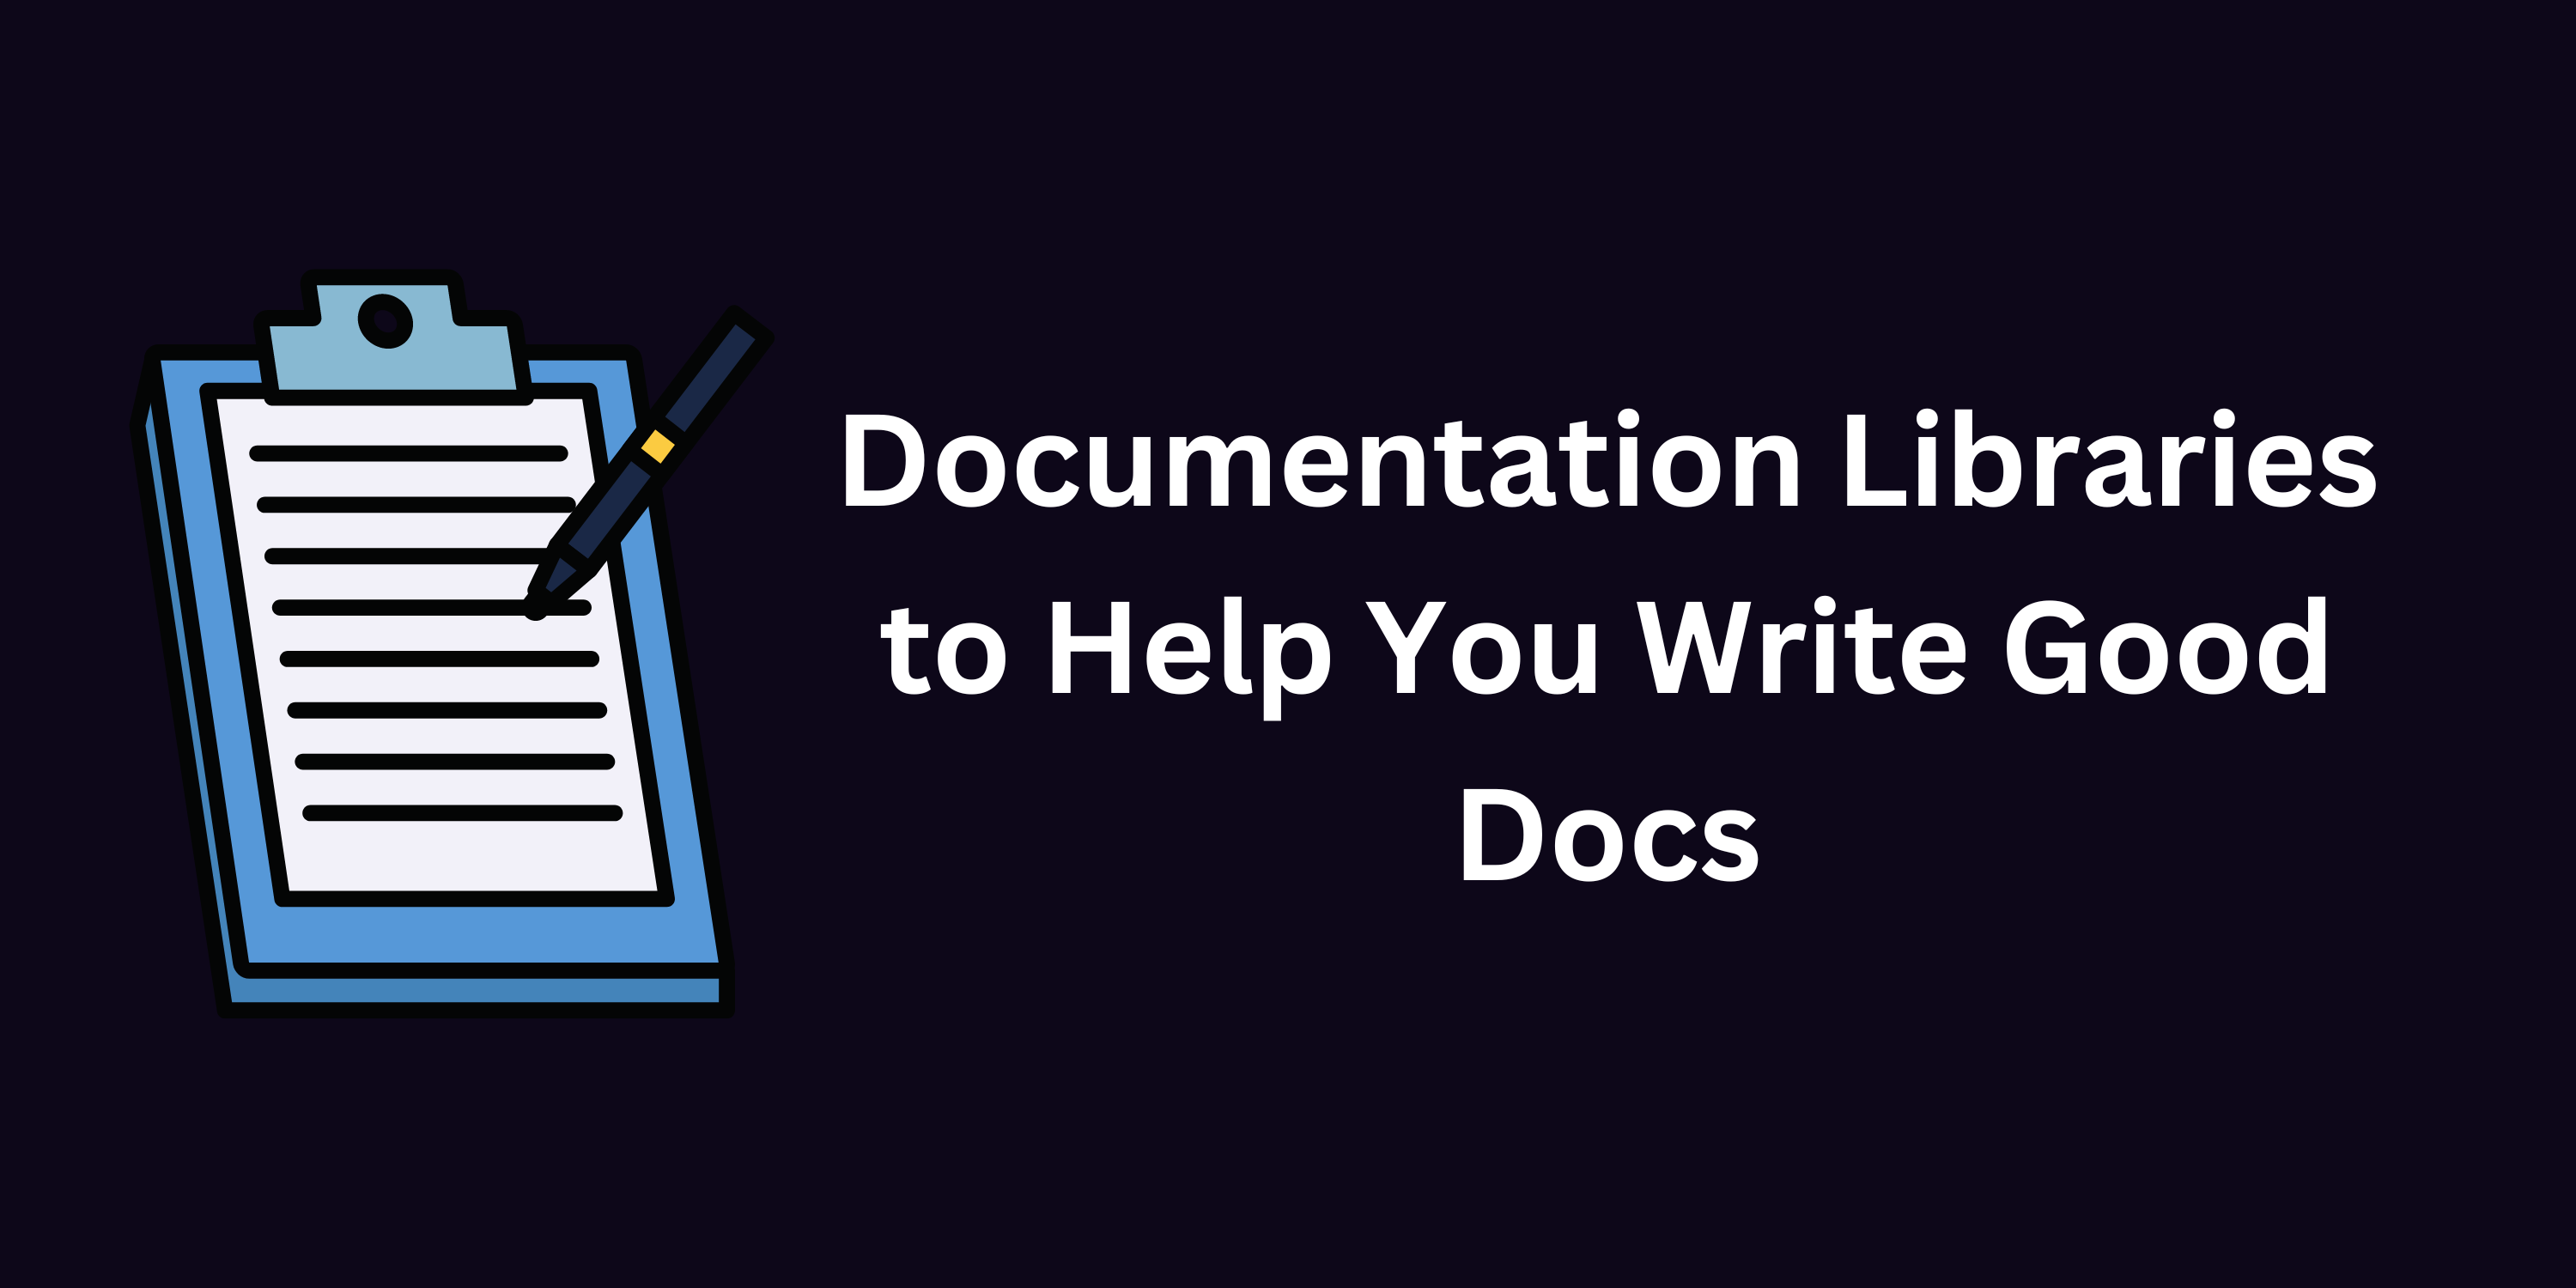 Image for Documentation Libraries to Help You Write Good Docs